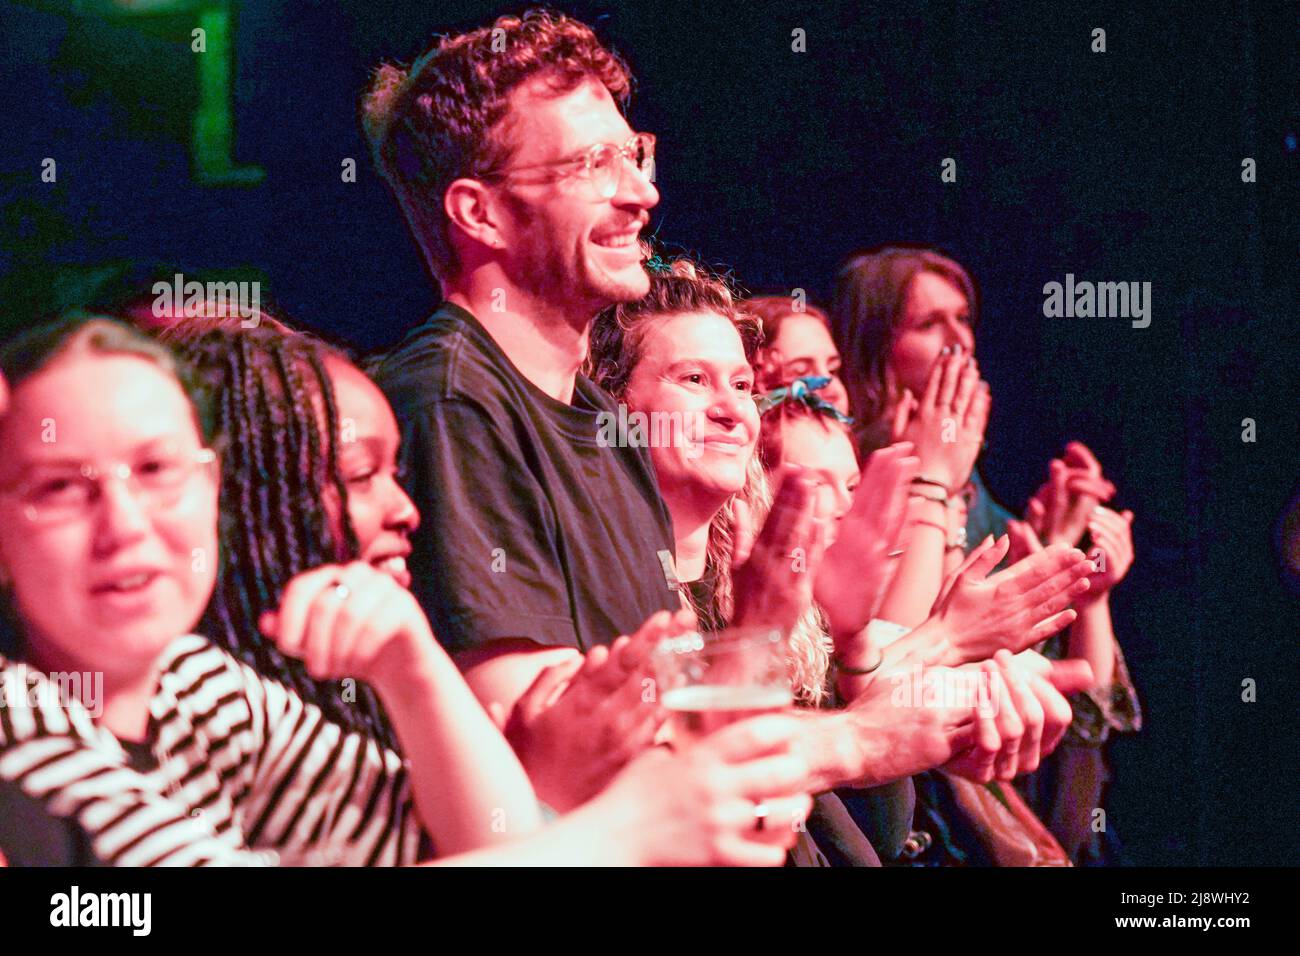 London, UK. Wednesday, 18 May, 2022. The front-row audience at the Kae Tempest gig at the Shepherds Bush O2 Empire in London. Photo: Richard Gray/Alamy Live News Stock Photo